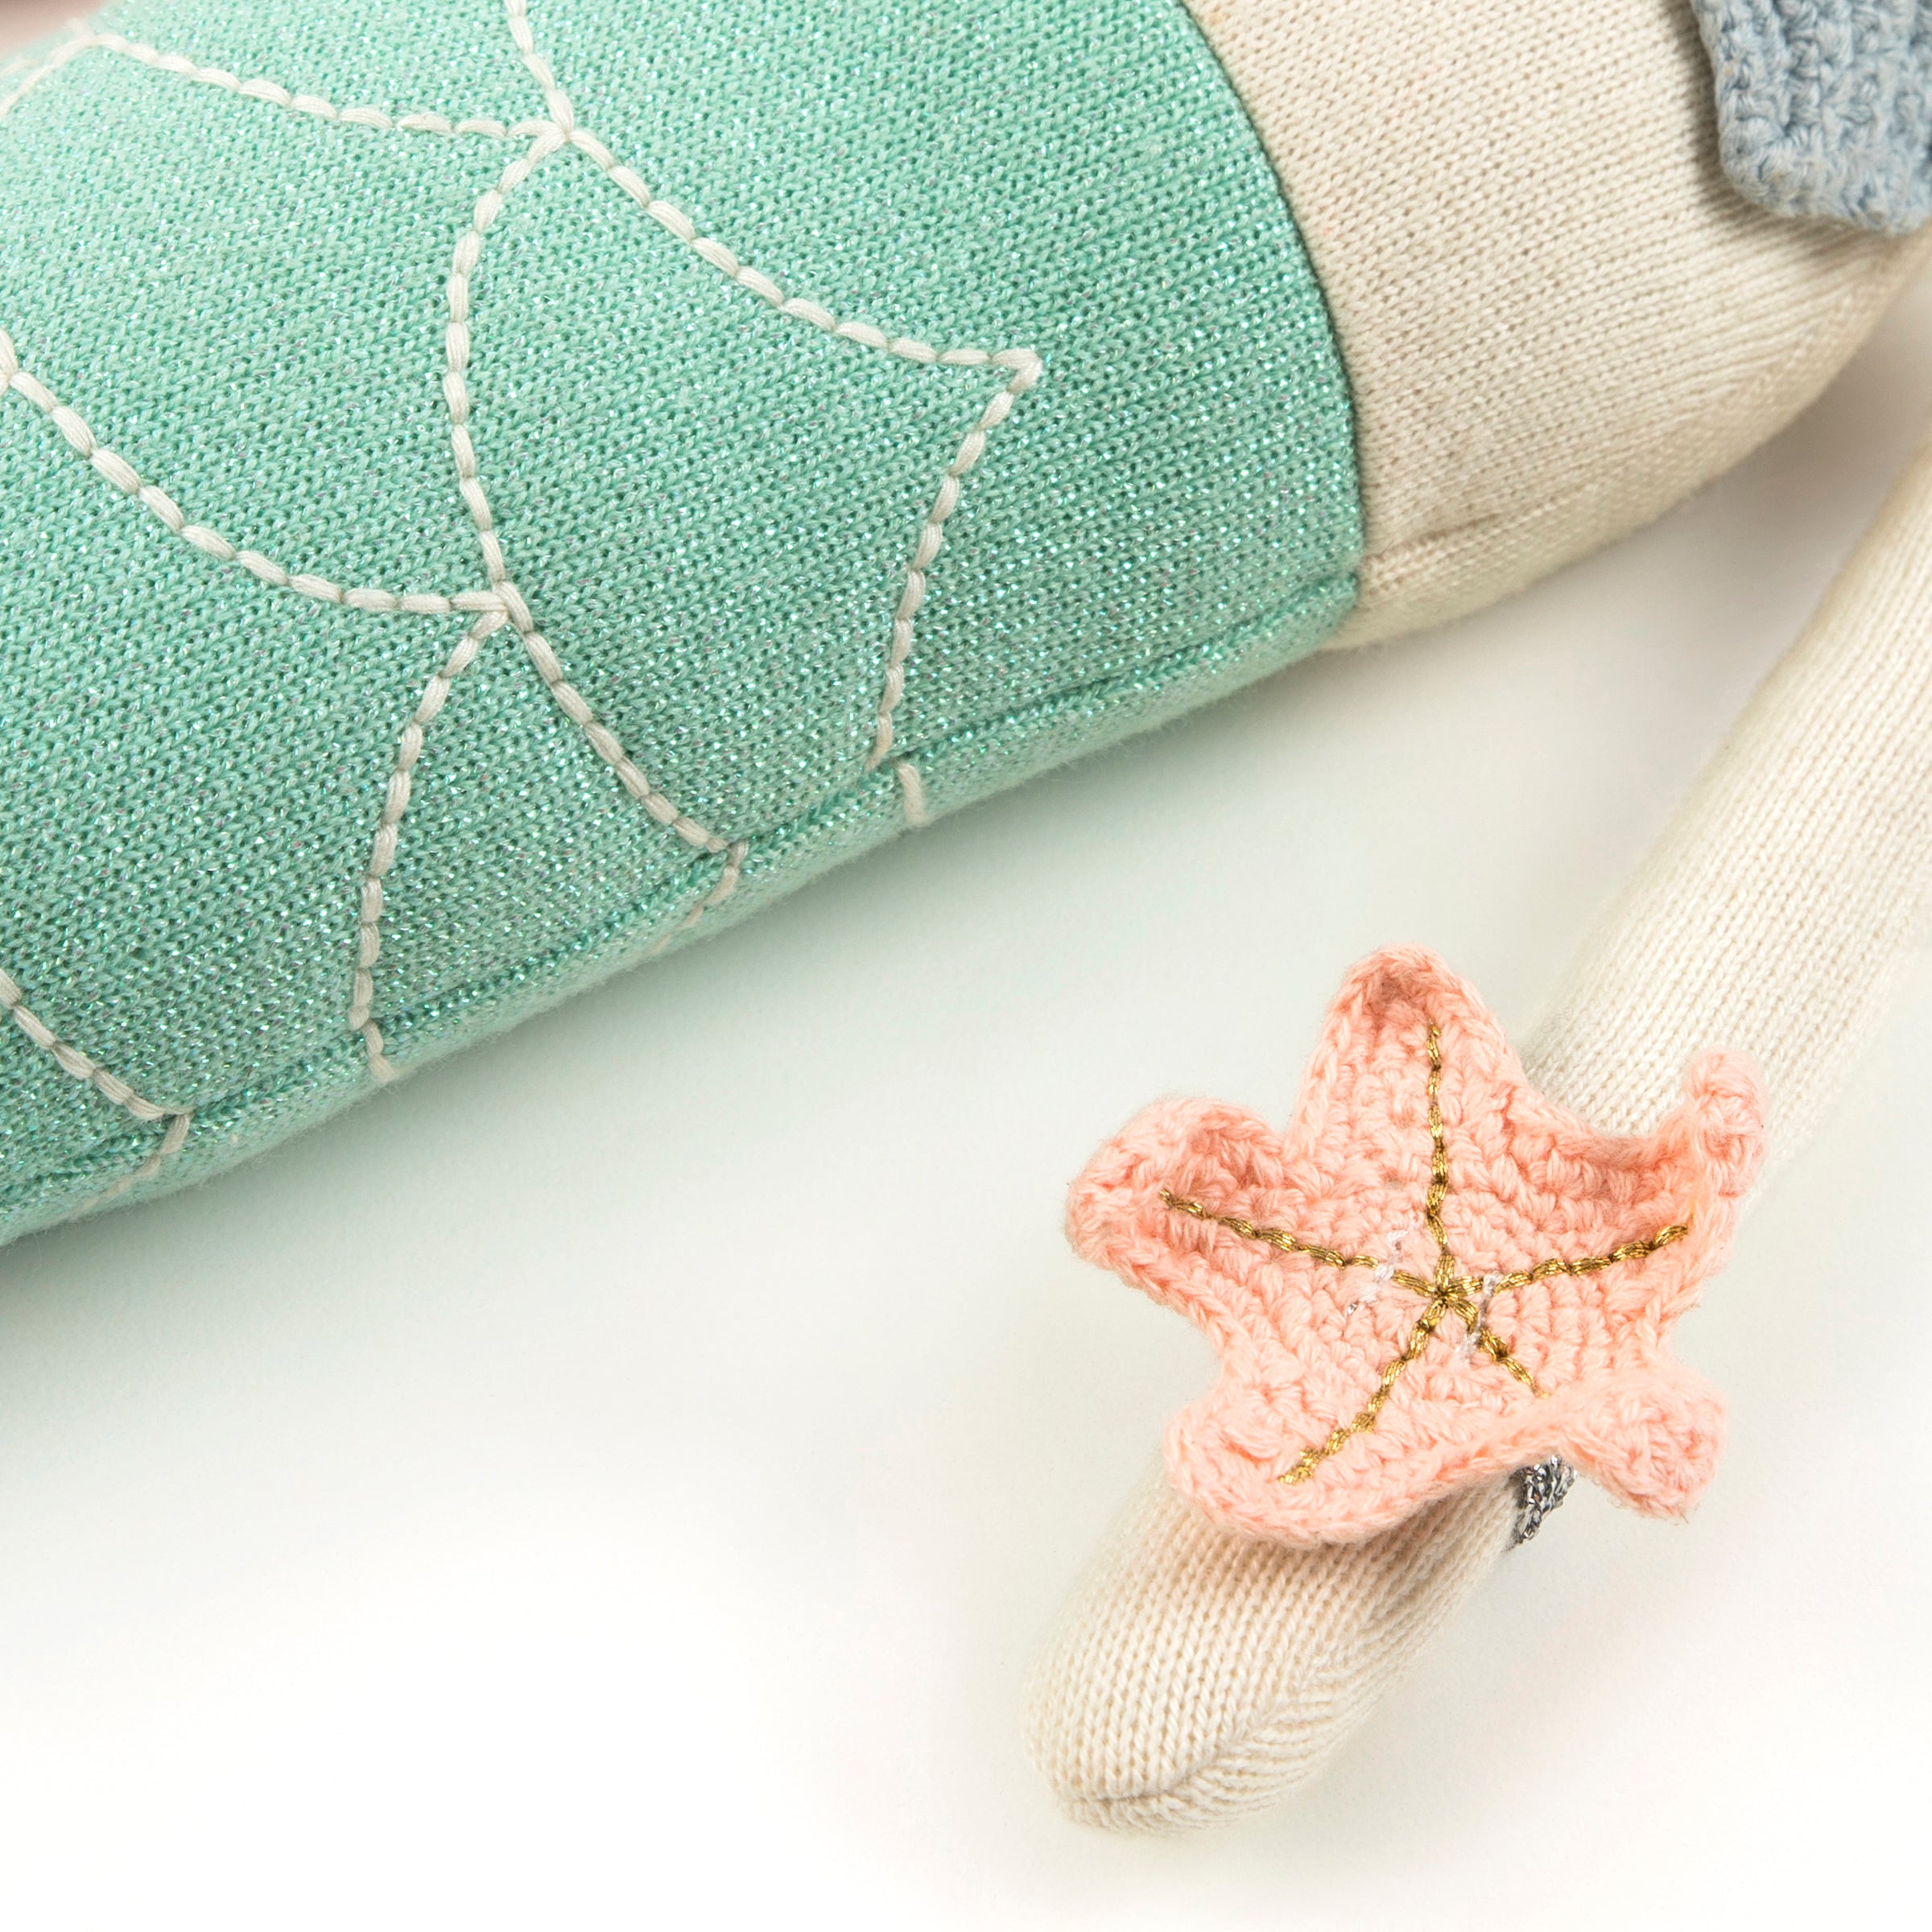 Our mermaid toy is a cotton toy with beautiful embellishments.